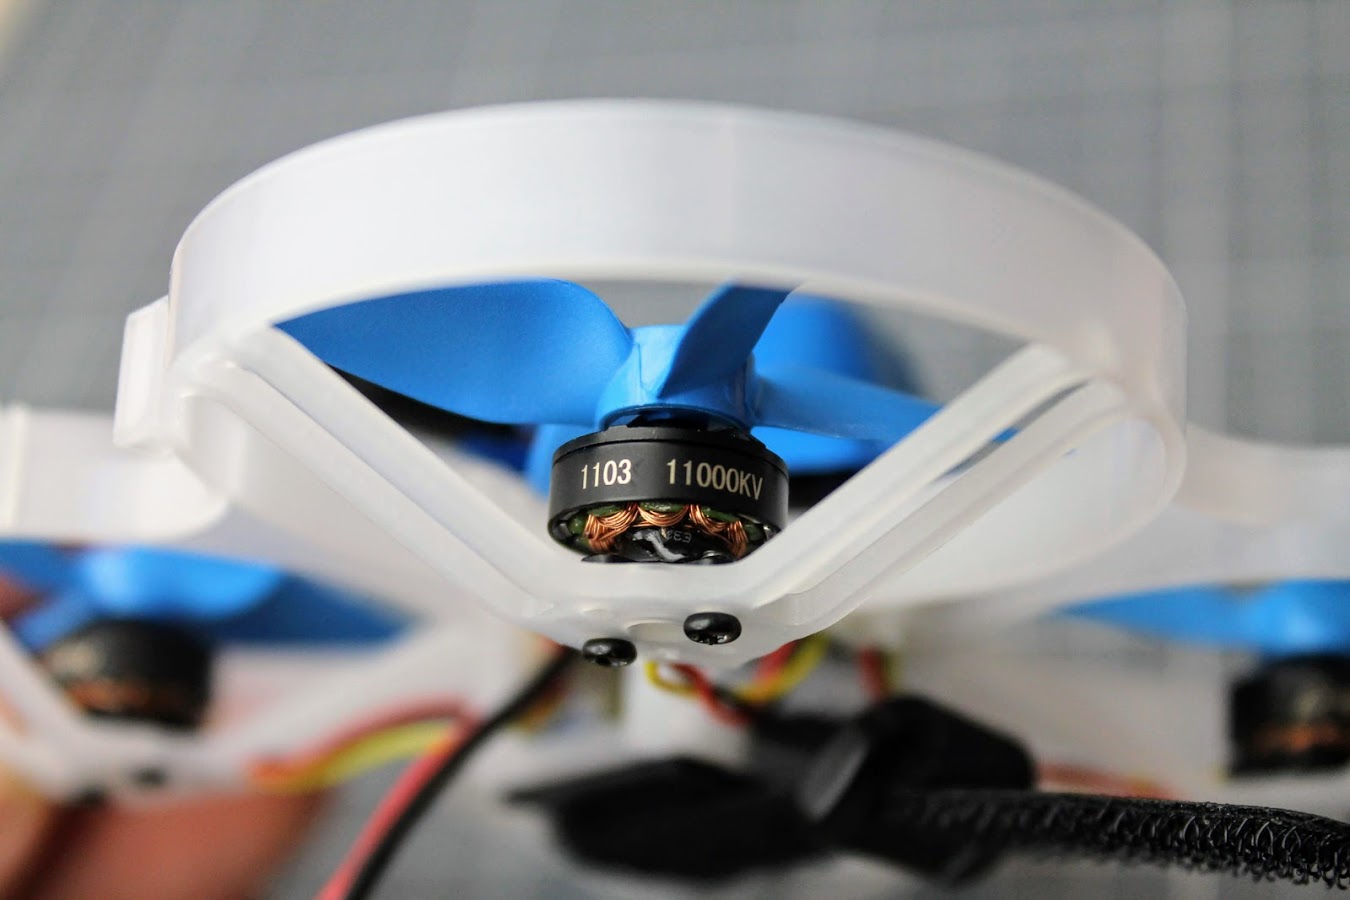 BETAFPV Beta85 Pro 2 TBS 2S Brushless Whoop Drone with F4 AIO FC 5A ESC 25mW C01 Camera 30 Degree 1103 11000KV Motor Tiny Whoop FPV Racing